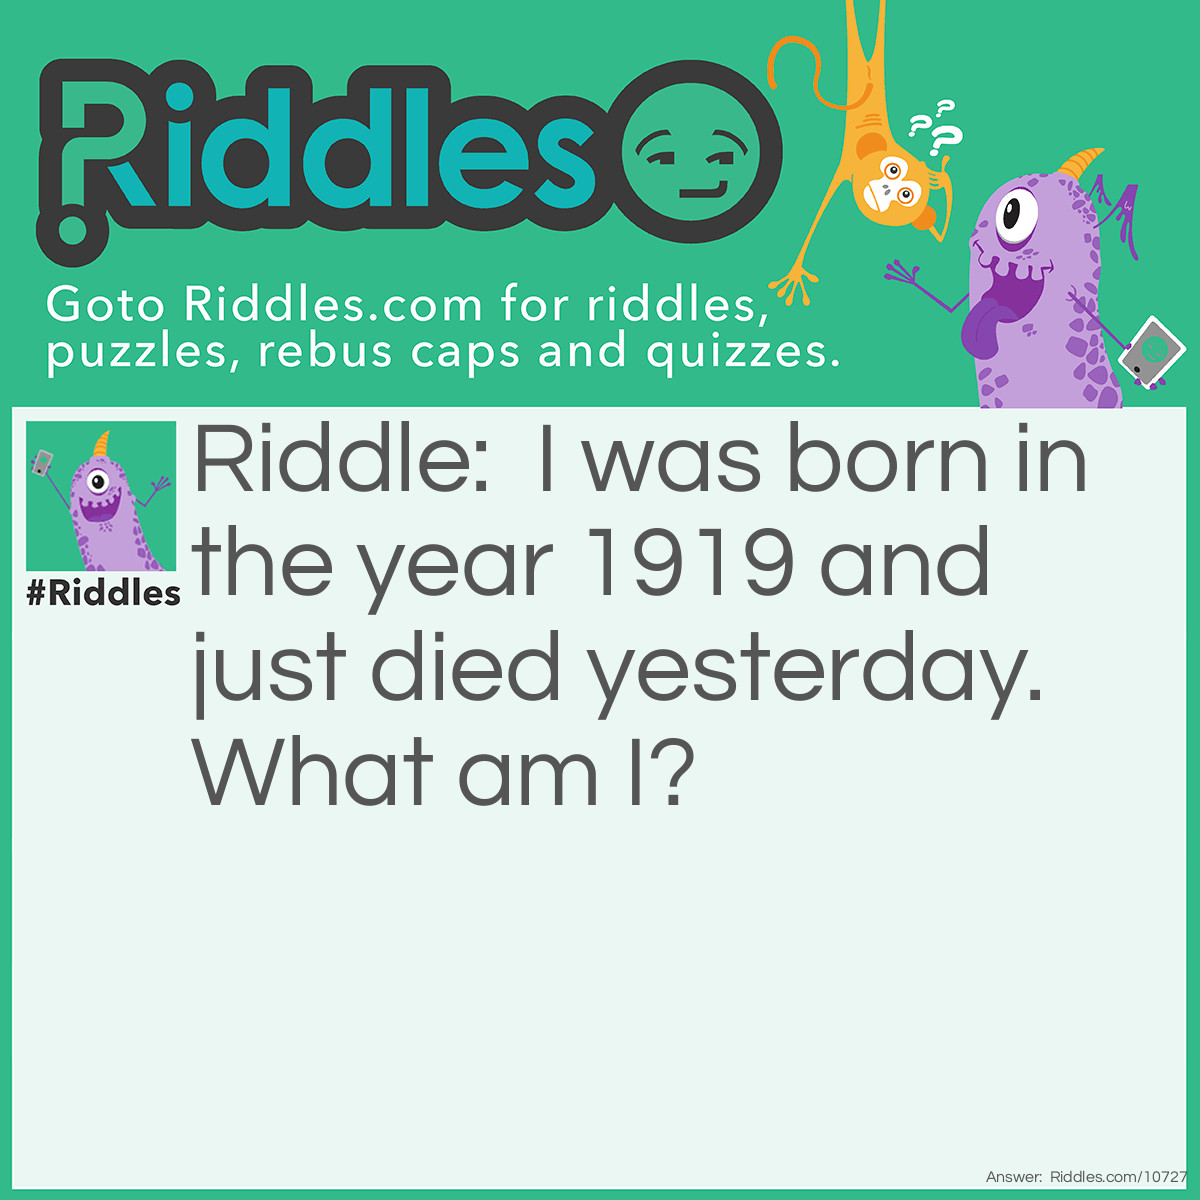 Riddle: I was born in the year 1919 and just died yesterday. What am I? Answer: A Liar